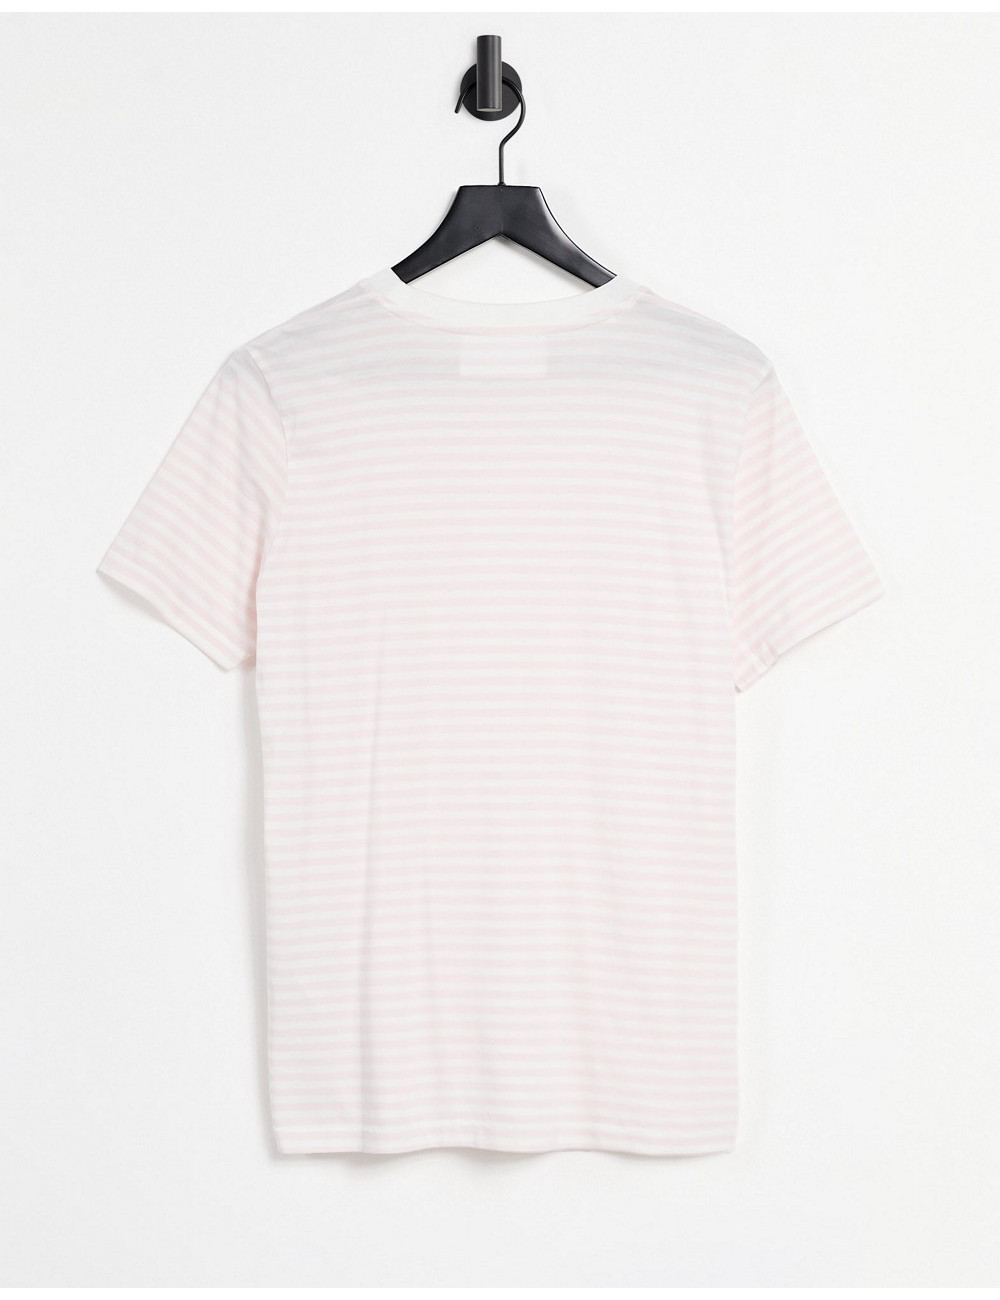 Selected Femme t-shirt in pink